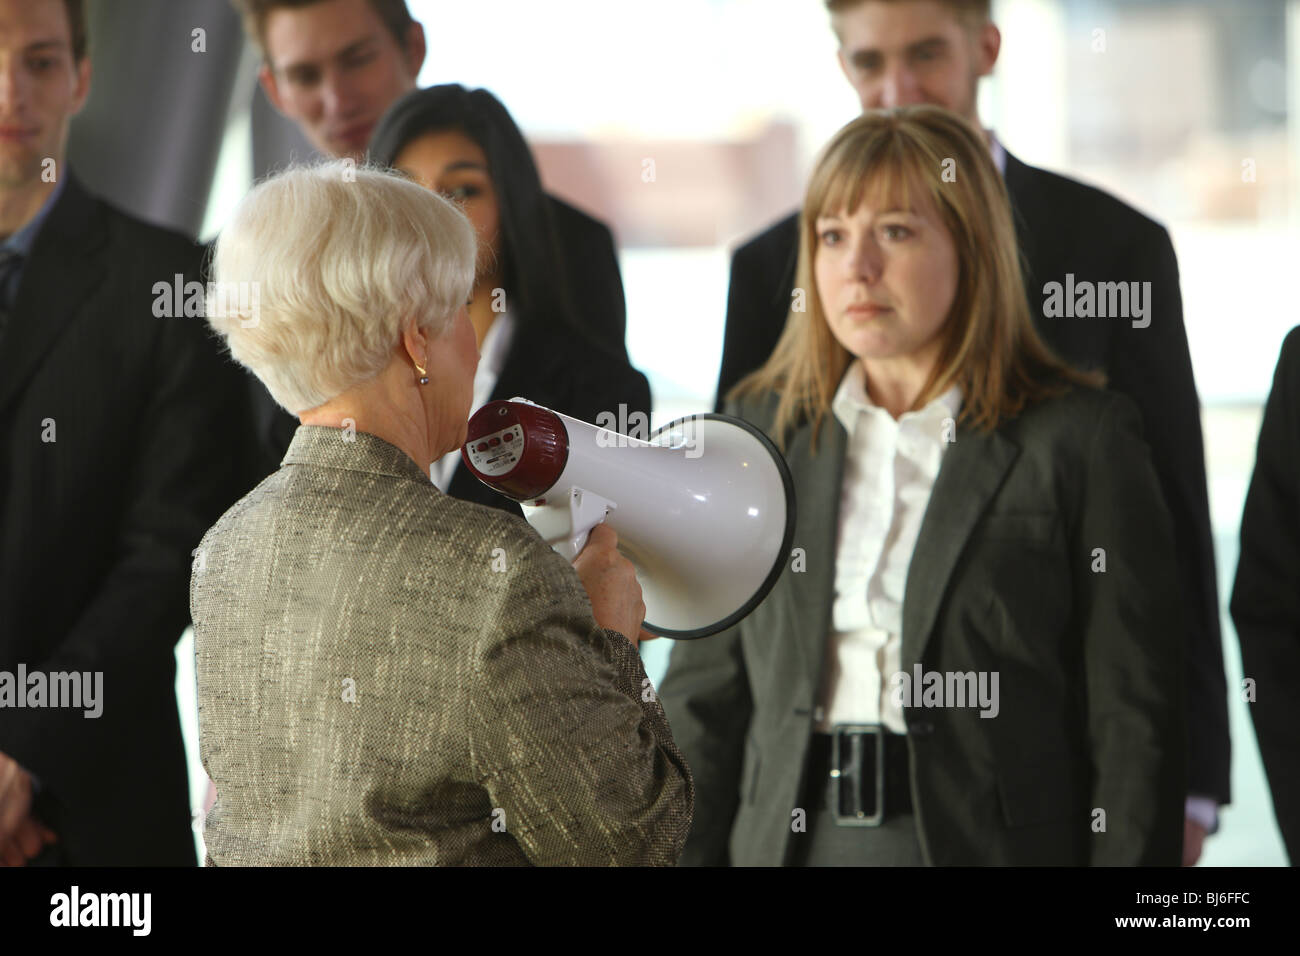 Boss yelling at employés with megaphone Banque D'Images